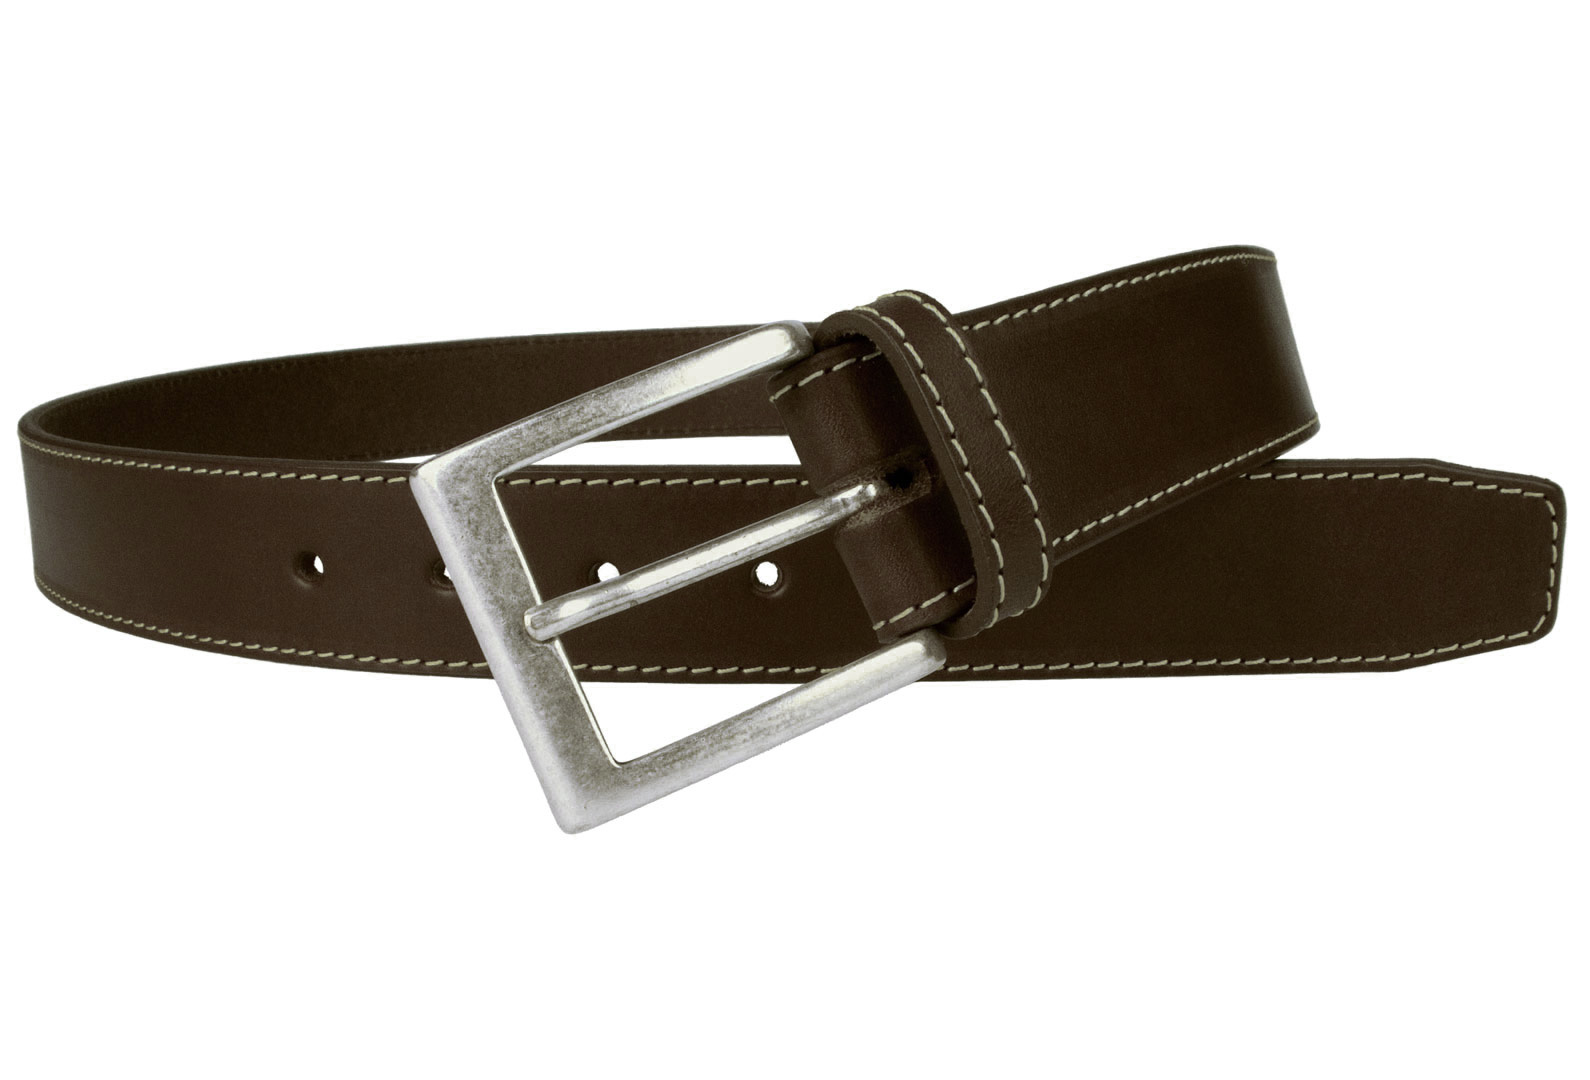 Brown Leather Belt With Contrasting Stitched Edge And Old Silver Plated Buckle - Belt Designs